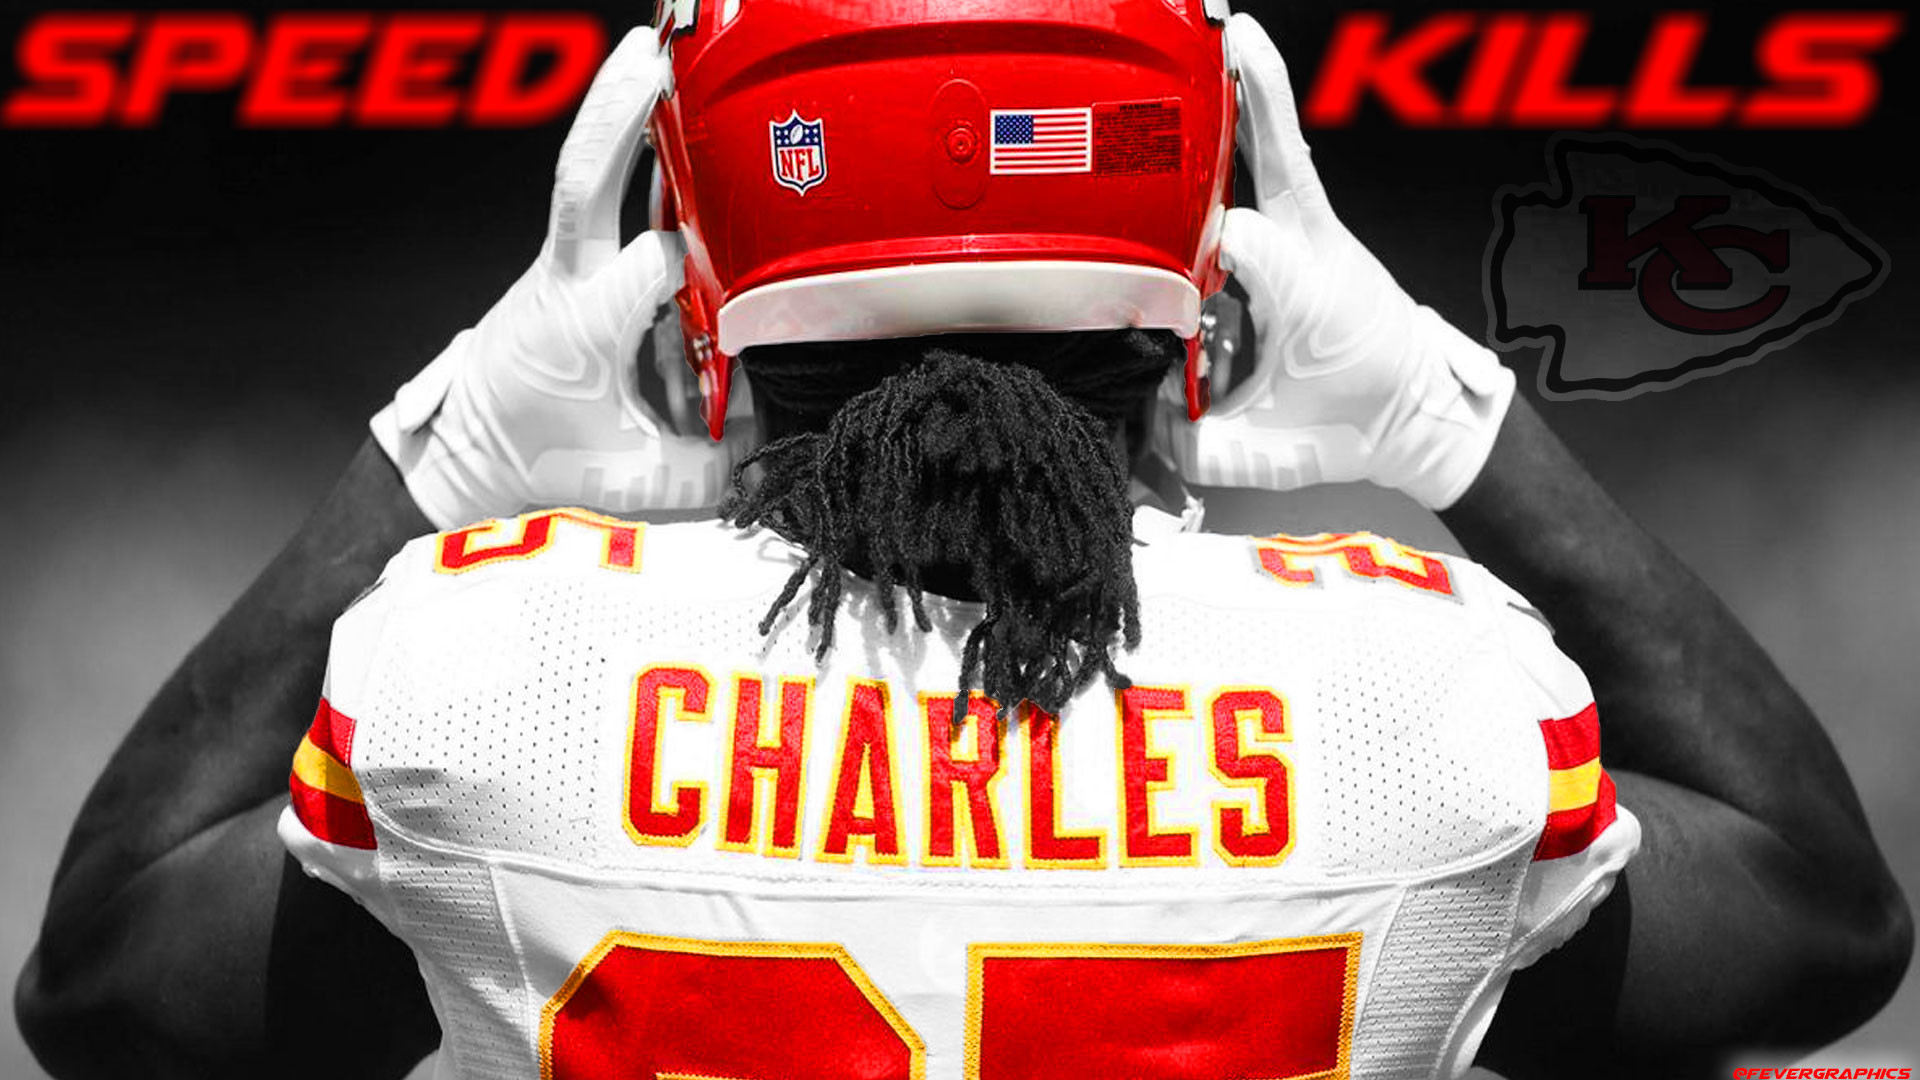 1920x1080 I made a Jamaal Charles wallpaper for the Chiefs sub! I hope you guys like  it! I worked really hard on it!